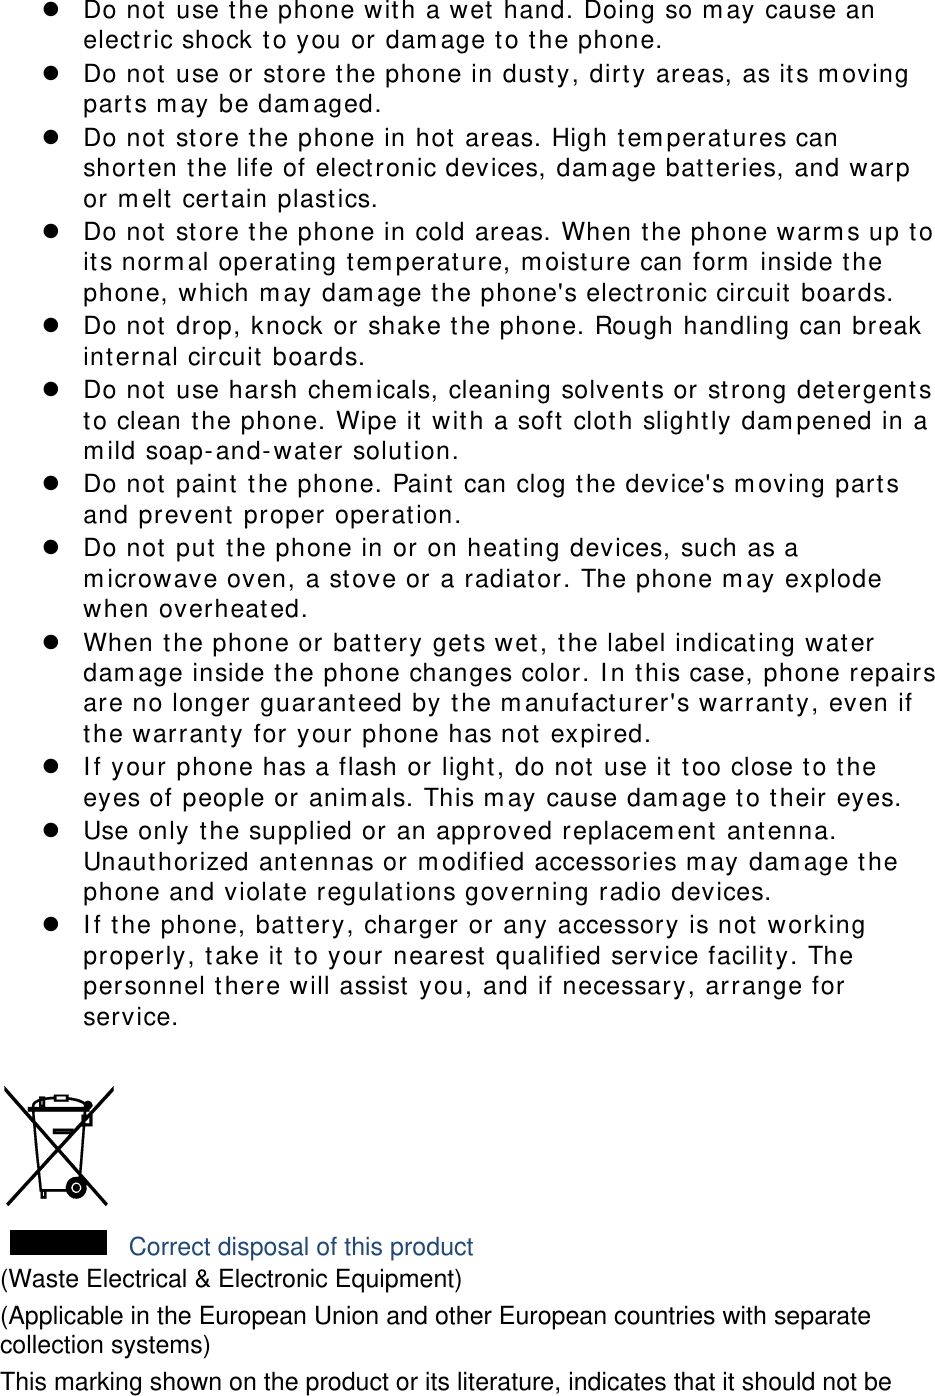  Do not use the phone with a wet hand. Doing so may cause an electric shock to you or damage to the phone.  Do not use or store the phone in dusty, dirty areas, as its moving parts may be damaged.  Do not store the phone in hot areas. High temperatures can shorten the life of electronic devices, damage batteries, and warp or melt certain plastics.  Do not store the phone in cold areas. When the phone warms up to its normal operating temperature, moisture can form inside the phone, which may damage the phone&apos;s electronic circuit boards.  Do not drop, knock or shake the phone. Rough handling can break internal circuit boards.  Do not use harsh chemicals, cleaning solvents or strong detergents to clean the phone. Wipe it with a soft cloth slightly dampened in a mild soap-and-water solution.  Do not paint the phone. Paint can clog the device&apos;s moving parts and prevent proper operation.  Do not put the phone in or on heating devices, such as a microwave oven, a stove or a radiator. The phone may explode when overheated.  When the phone or battery gets wet, the label indicating water damage inside the phone changes color. In this case, phone repairs are no longer guaranteed by the manufacturer&apos;s warranty, even if the warranty for your phone has not expired.   If your phone has a flash or light, do not use it too close to the eyes of people or animals. This may cause damage to their eyes.  Use only the supplied or an approved replacement antenna. Unauthorized antennas or modified accessories may damage the phone and violate regulations governing radio devices.  If the phone, battery, charger or any accessory is not working properly, take it to your nearest qualified service facility. The personnel there will assist you, and if necessary, arrange for service.   Correct disposal of this product (Waste Electrical &amp; Electronic Equipment) (Applicable in the European Union and other European countries with separate collection systems) This marking shown on the product or its literature, indicates that it should not be 